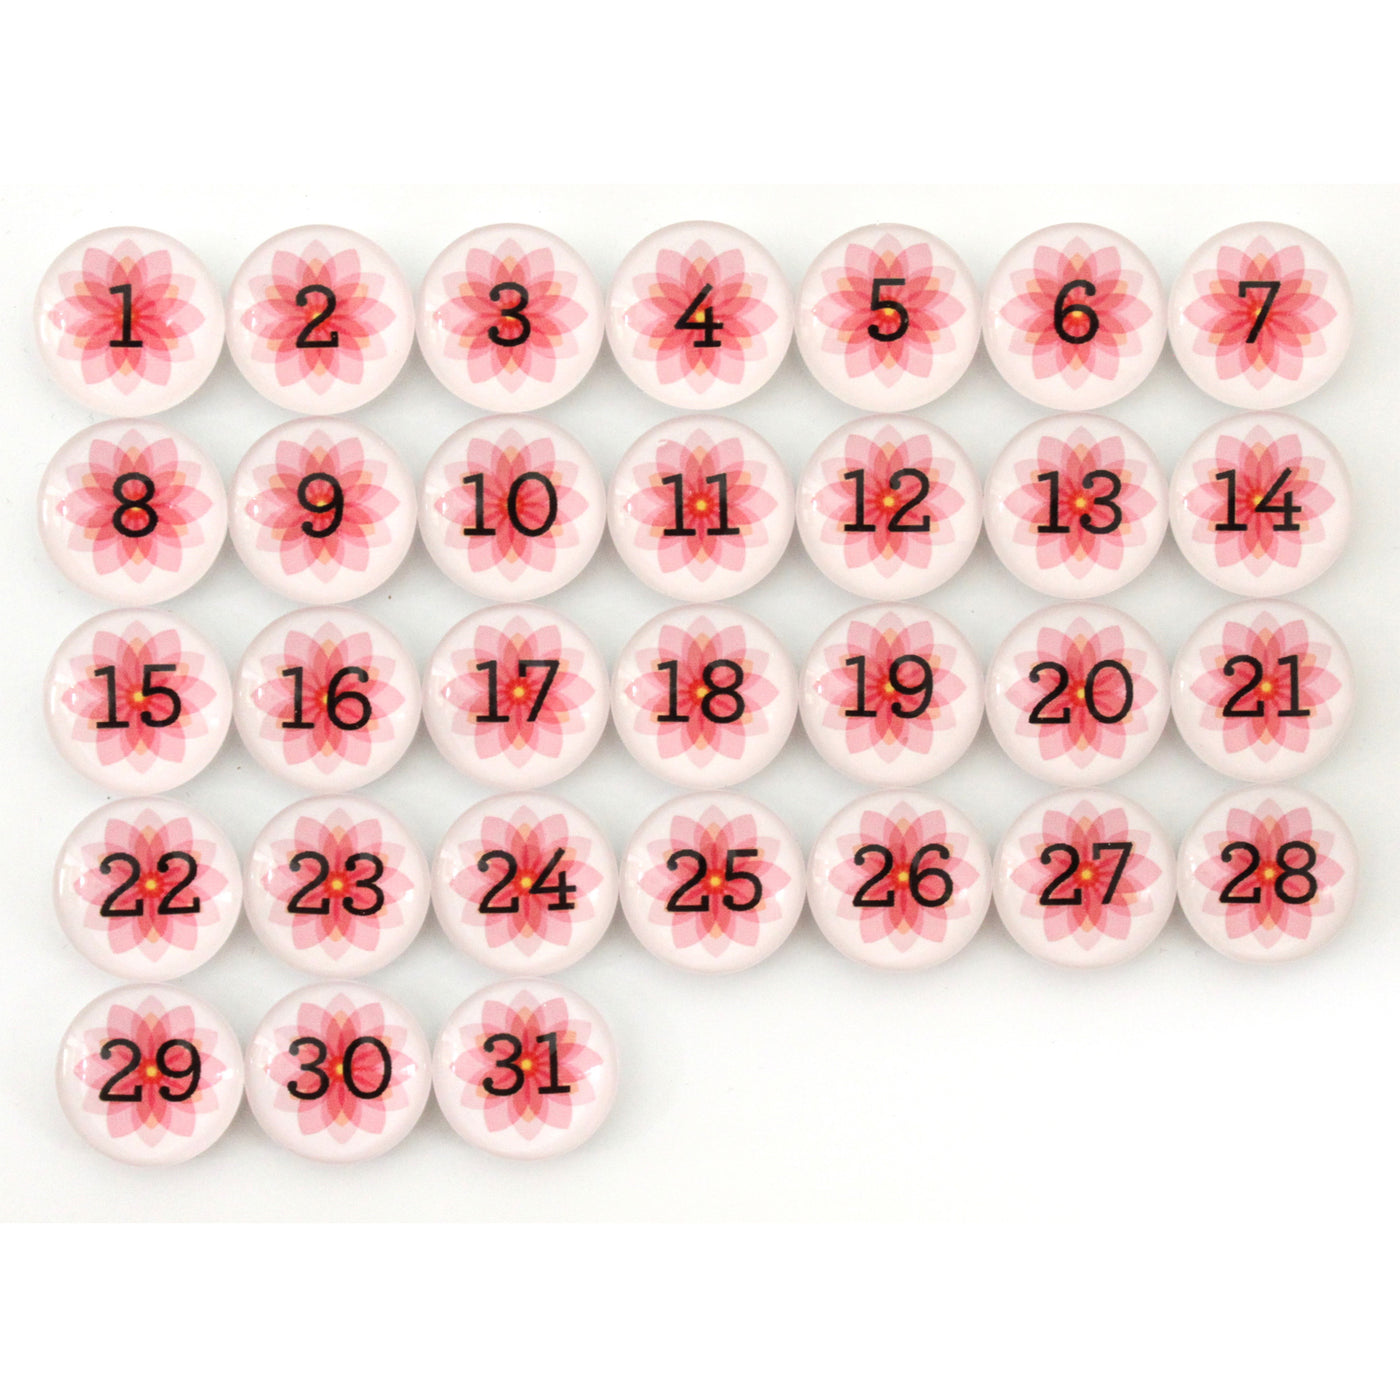 Number Magnets for May | Flowers | Spring Blooms